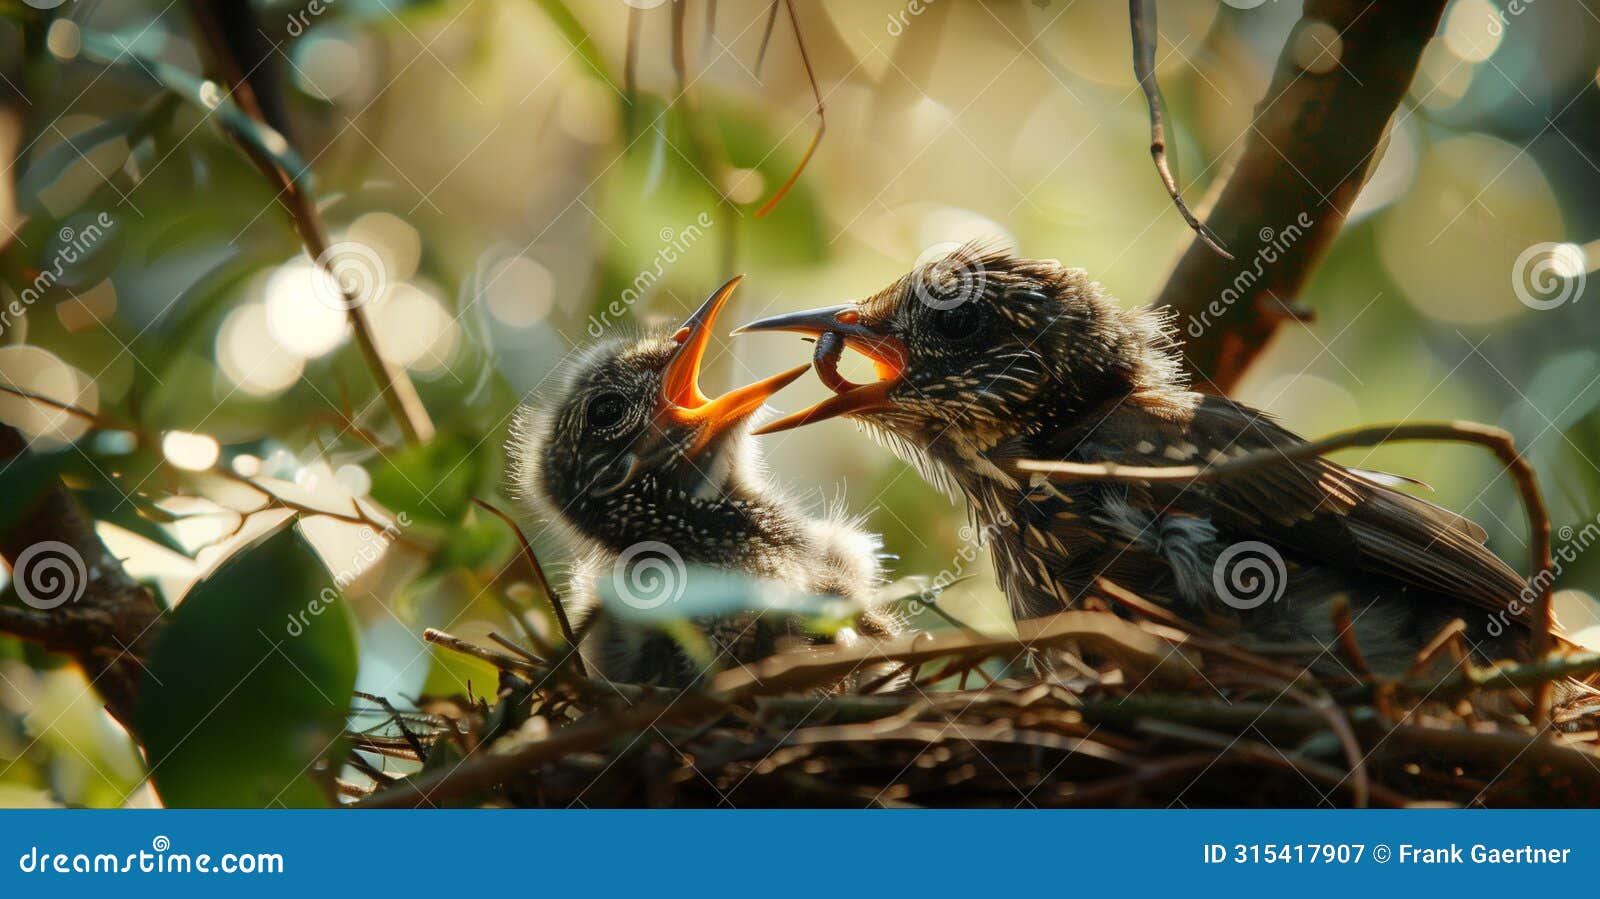 intimate moment of a mother bird nourishing her newborns in the warmth of sunrise